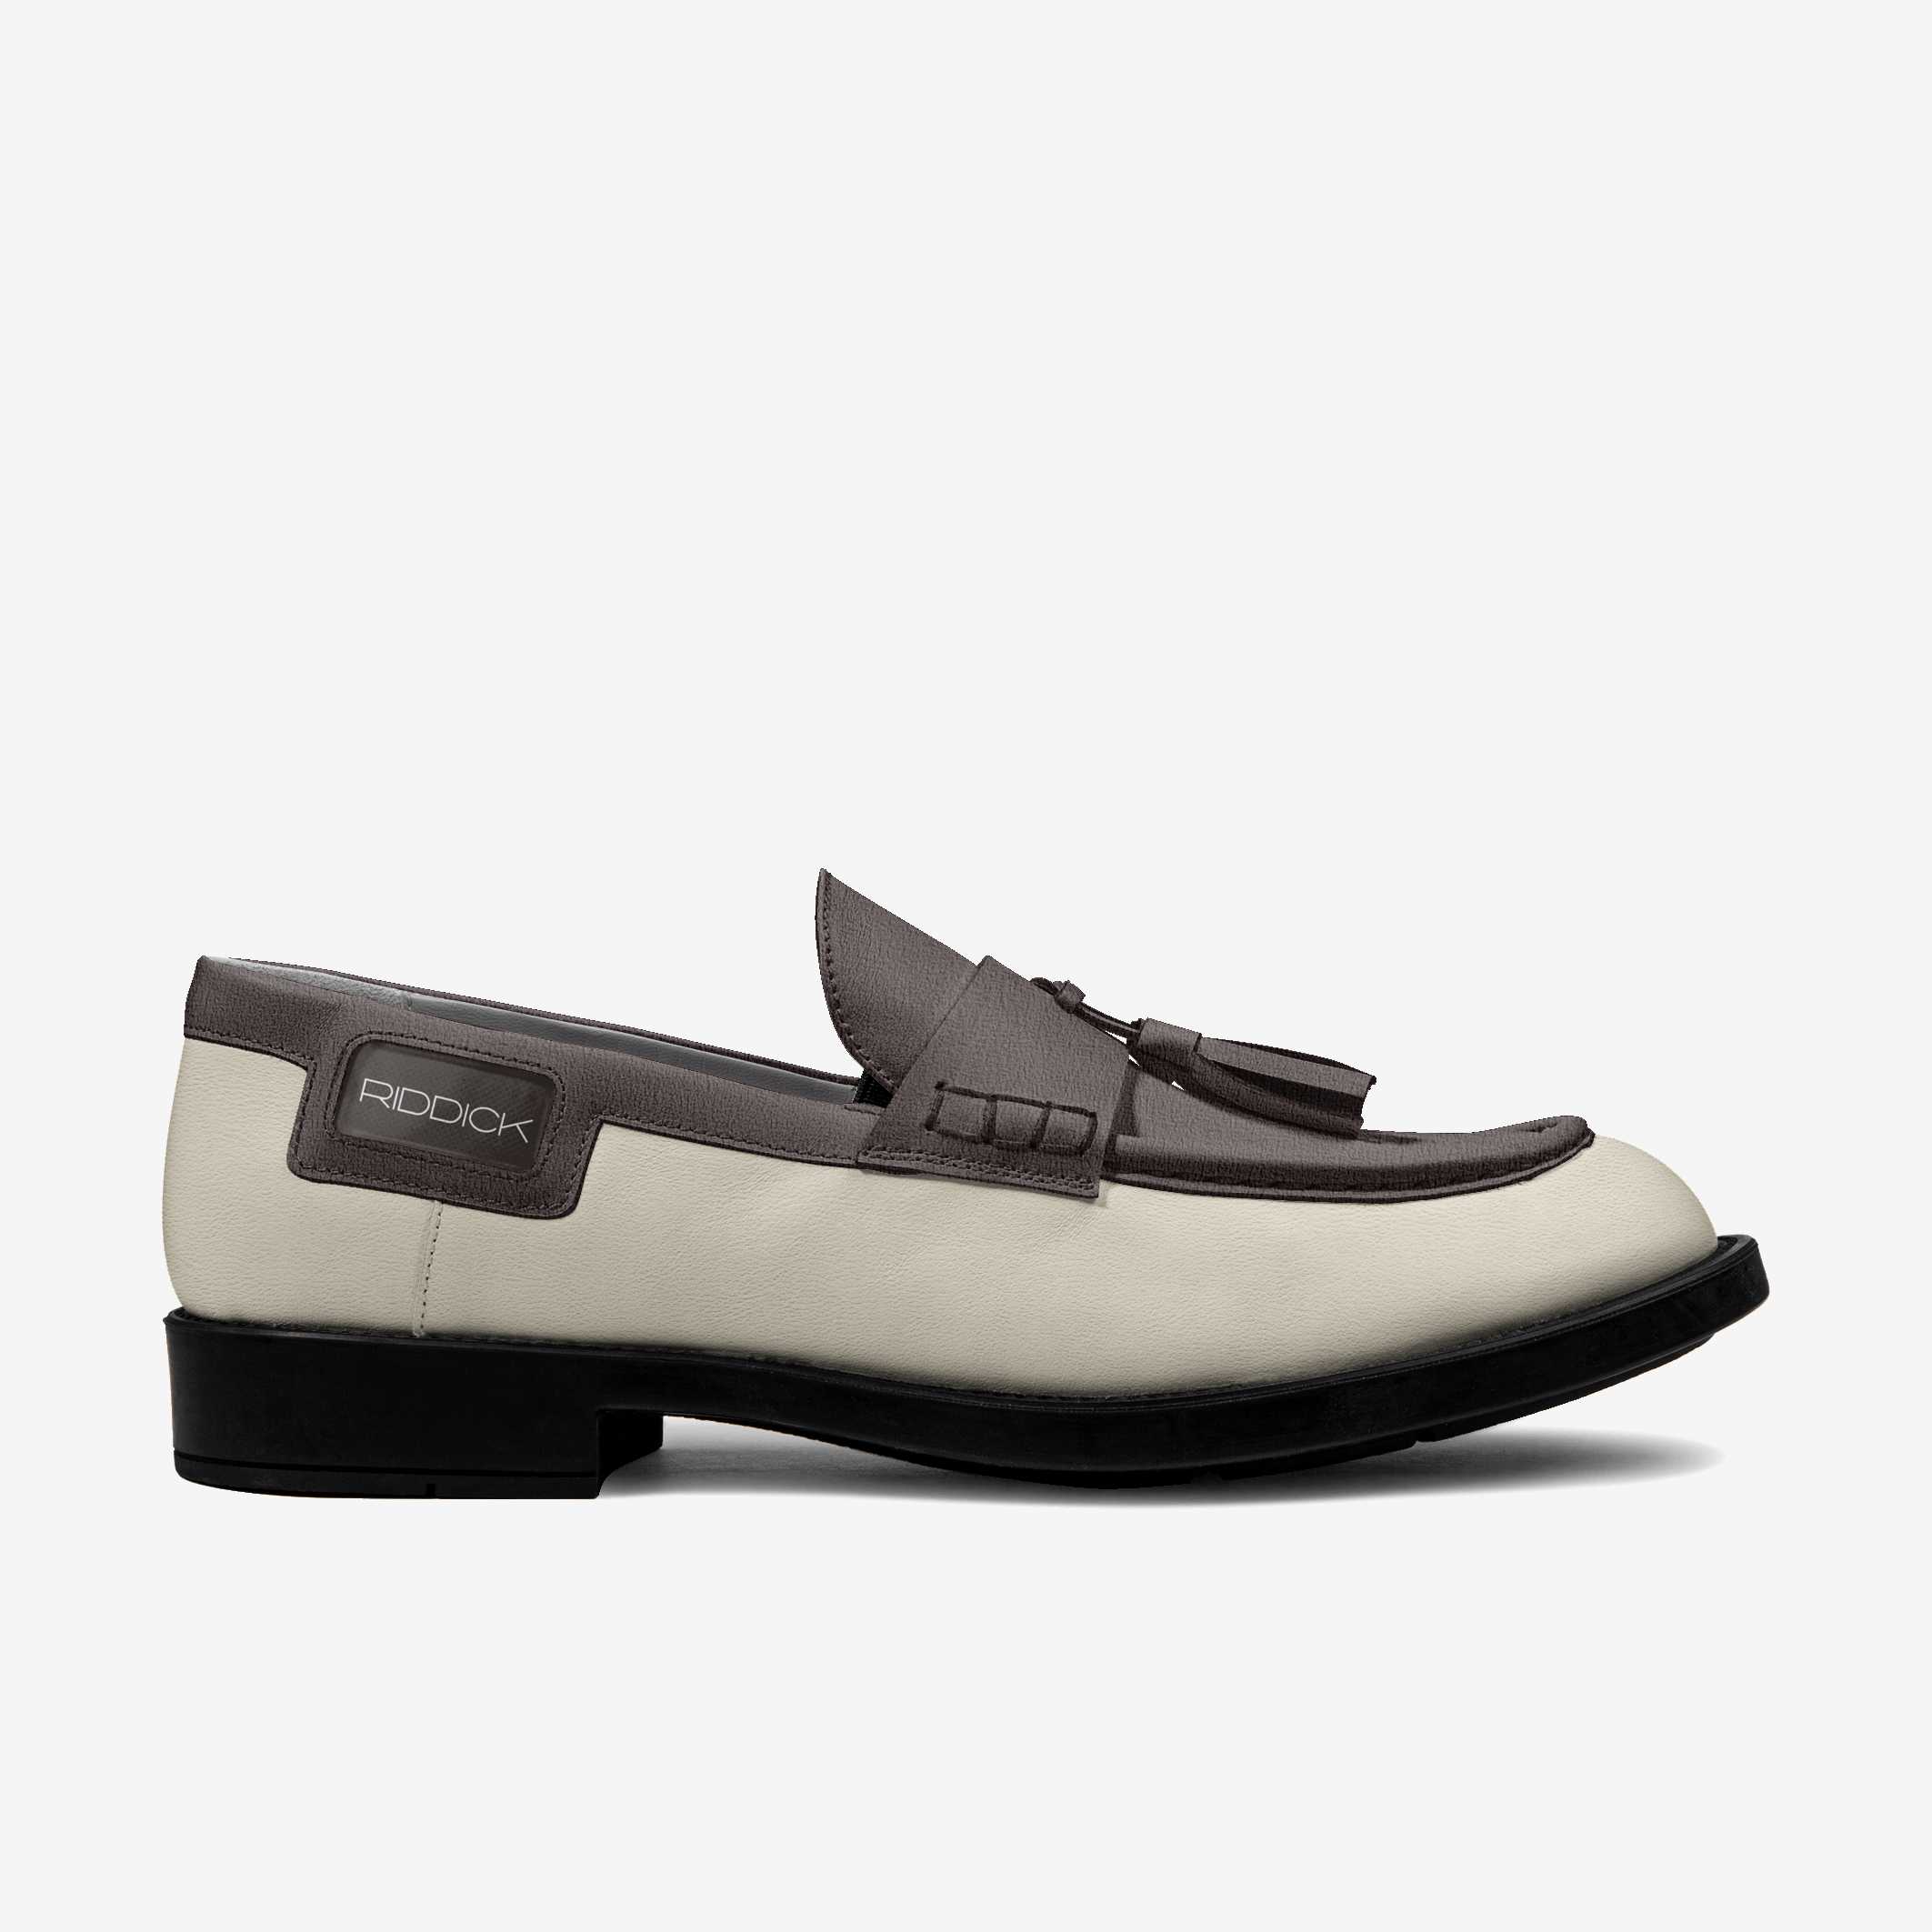 EXEC, THE TASSEL (IN 2-TONE EARTH) - Riddick Shoes Shoe Riddick Shoes   